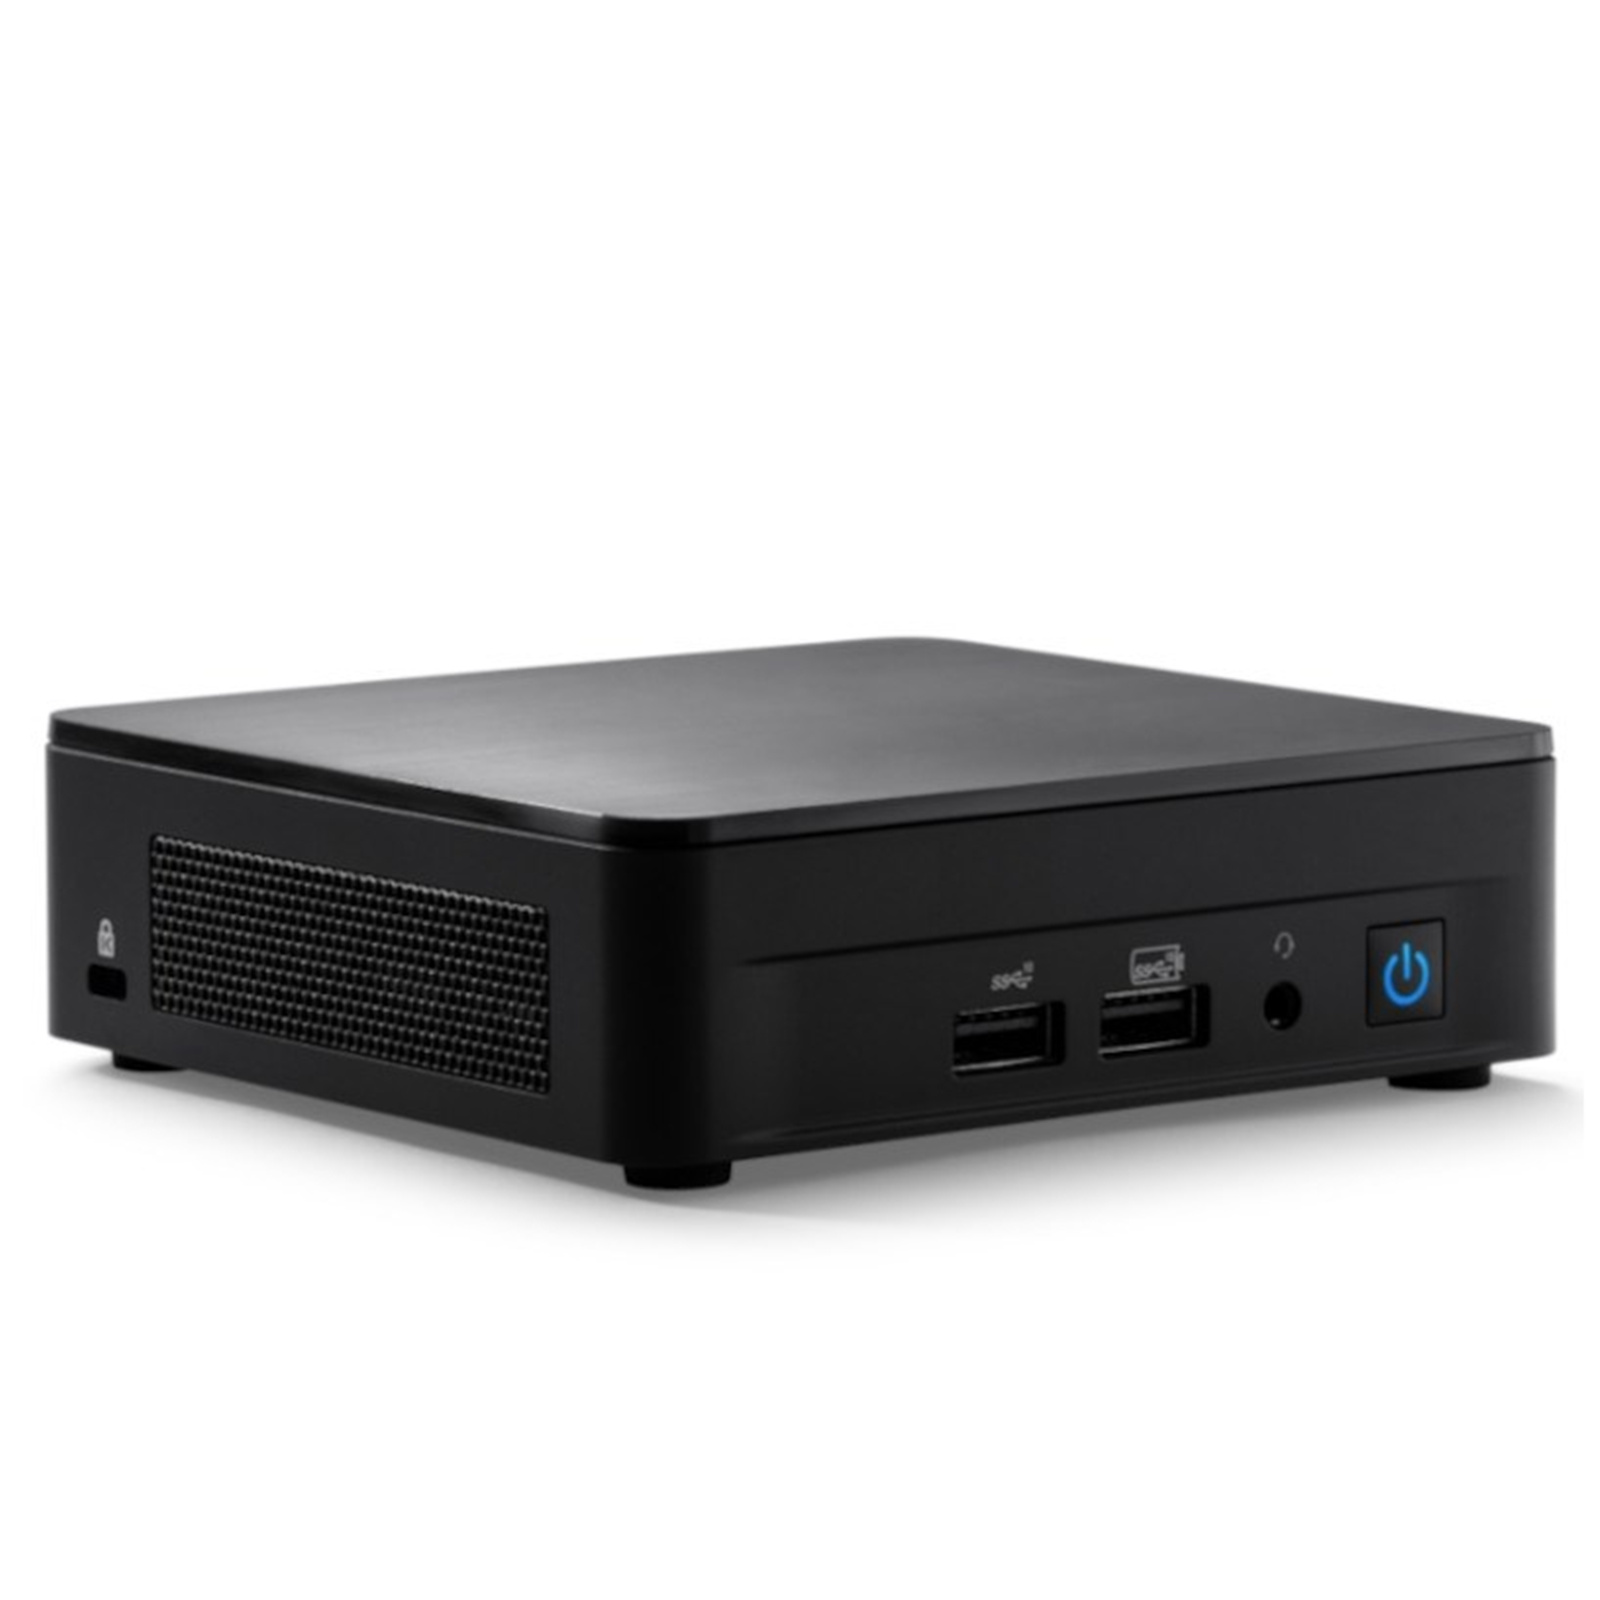 Using the Intel NUC for Industrial Applications - Hope Industrial